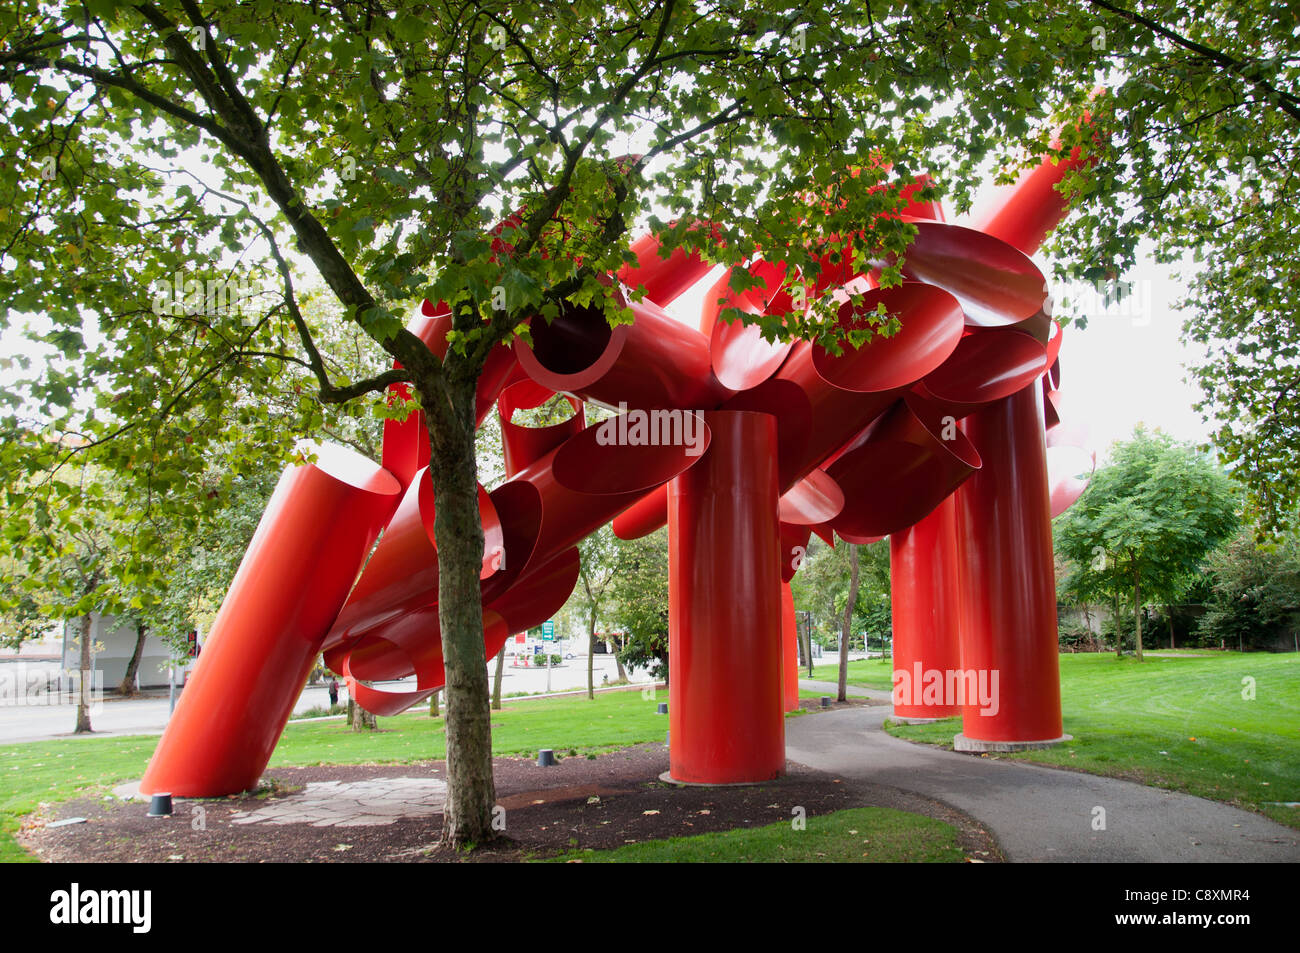 Sculpture in Red and Shades of Green Seattle Town City Washington United States Stock Photo